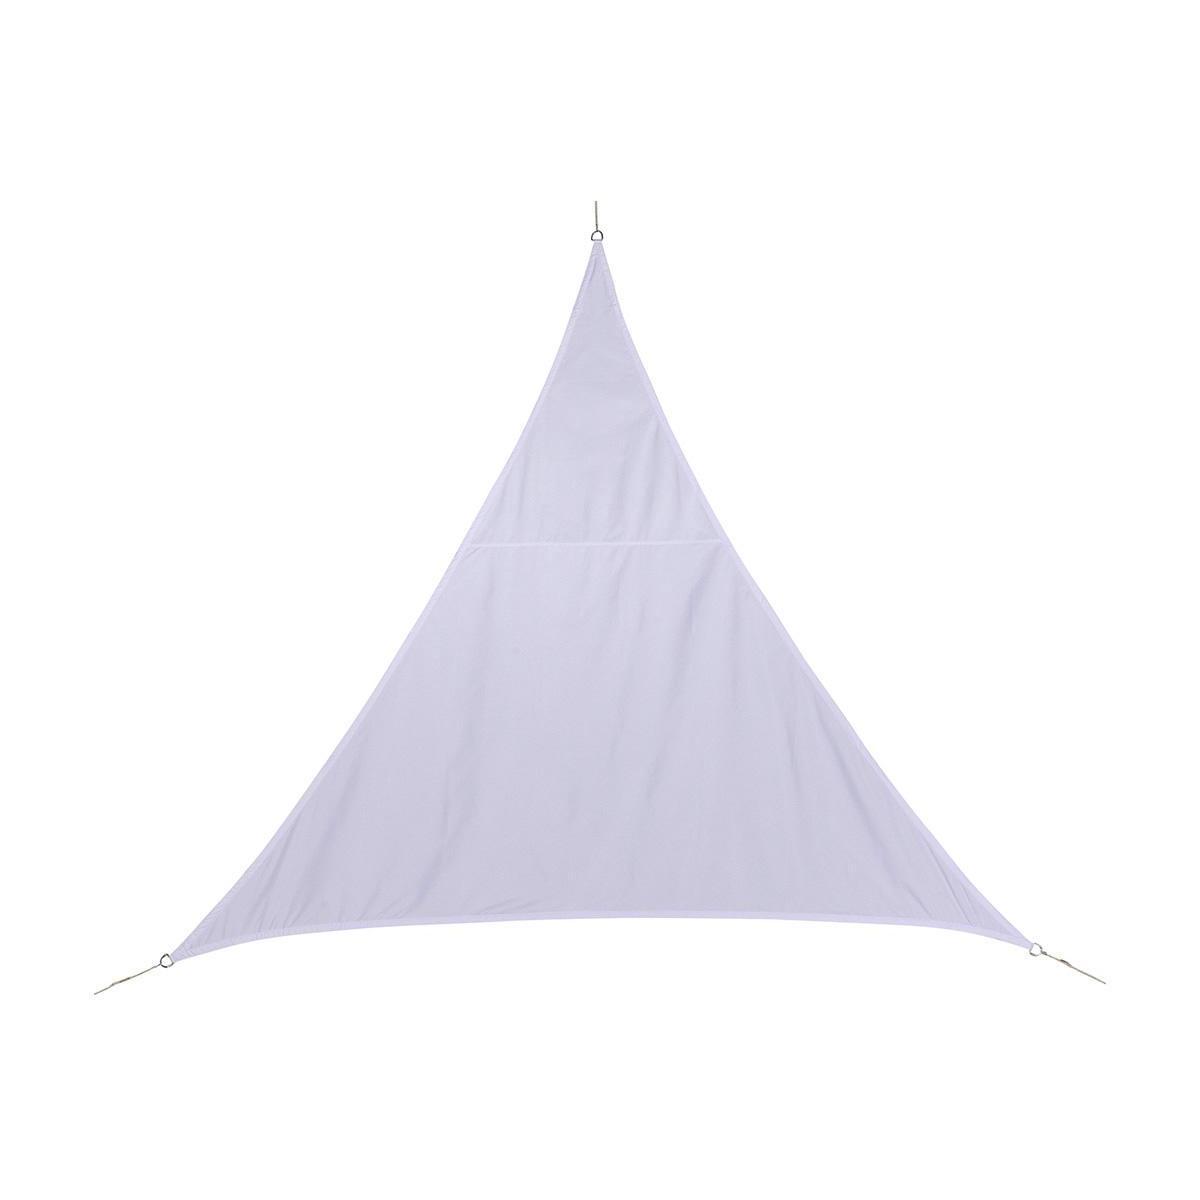 Voile d'ombrage triangulaire - Polyester et Polyamide - 5 x 5 x 5 m - Blanc